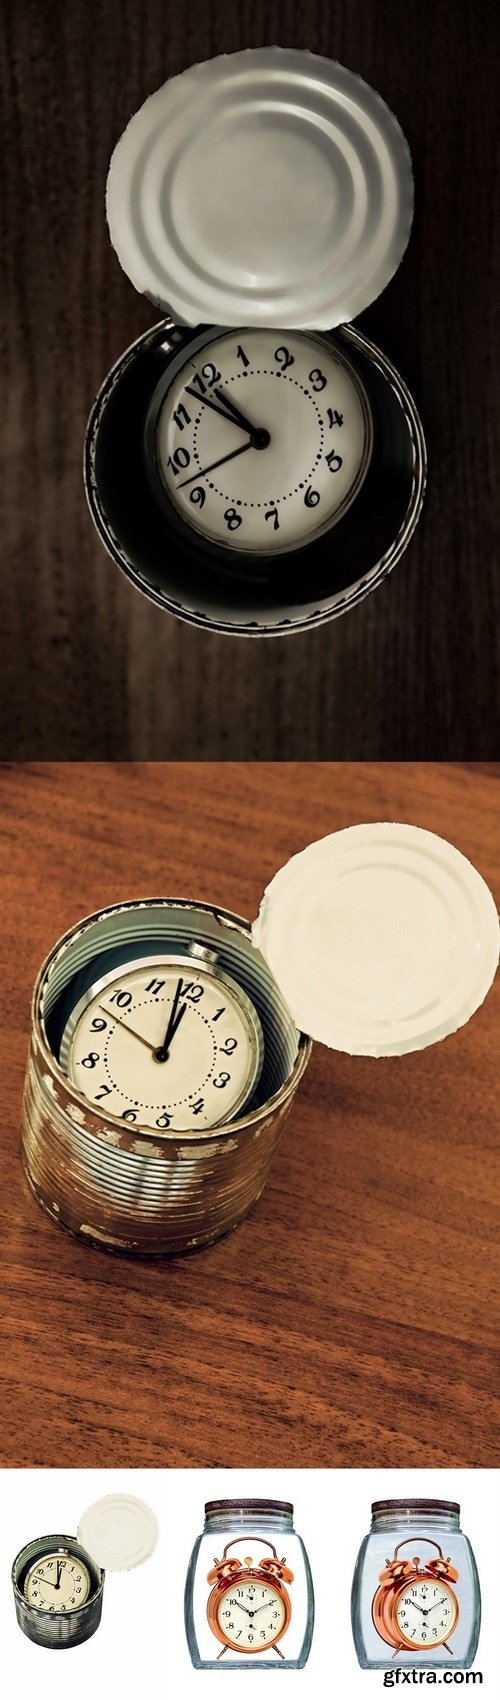 Canned time concept.Retro Golden Alarm Clock preserved in glass jar